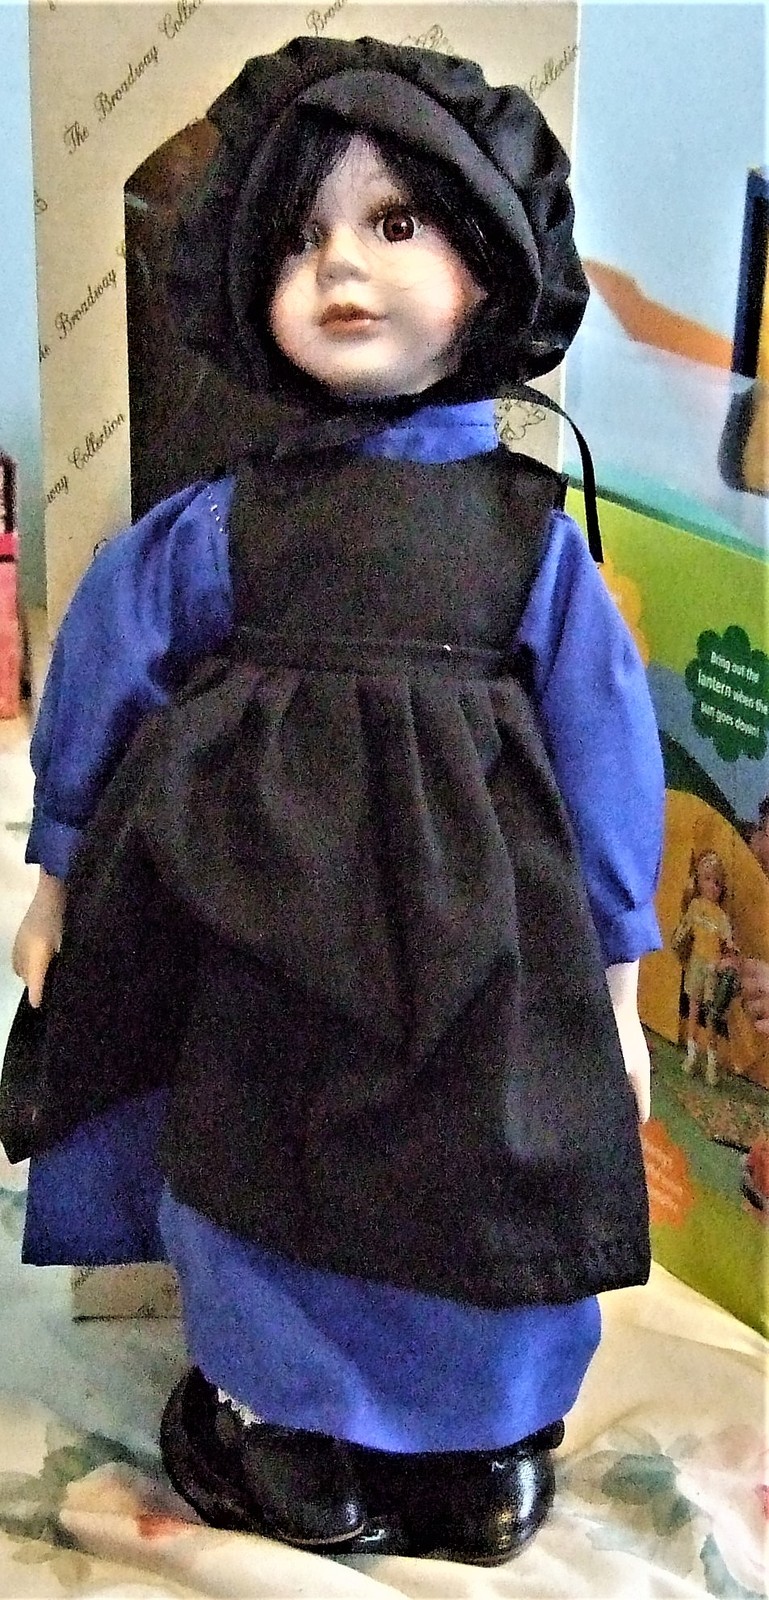 Doll - The Broadway Collection - Amish Girl - $19.00